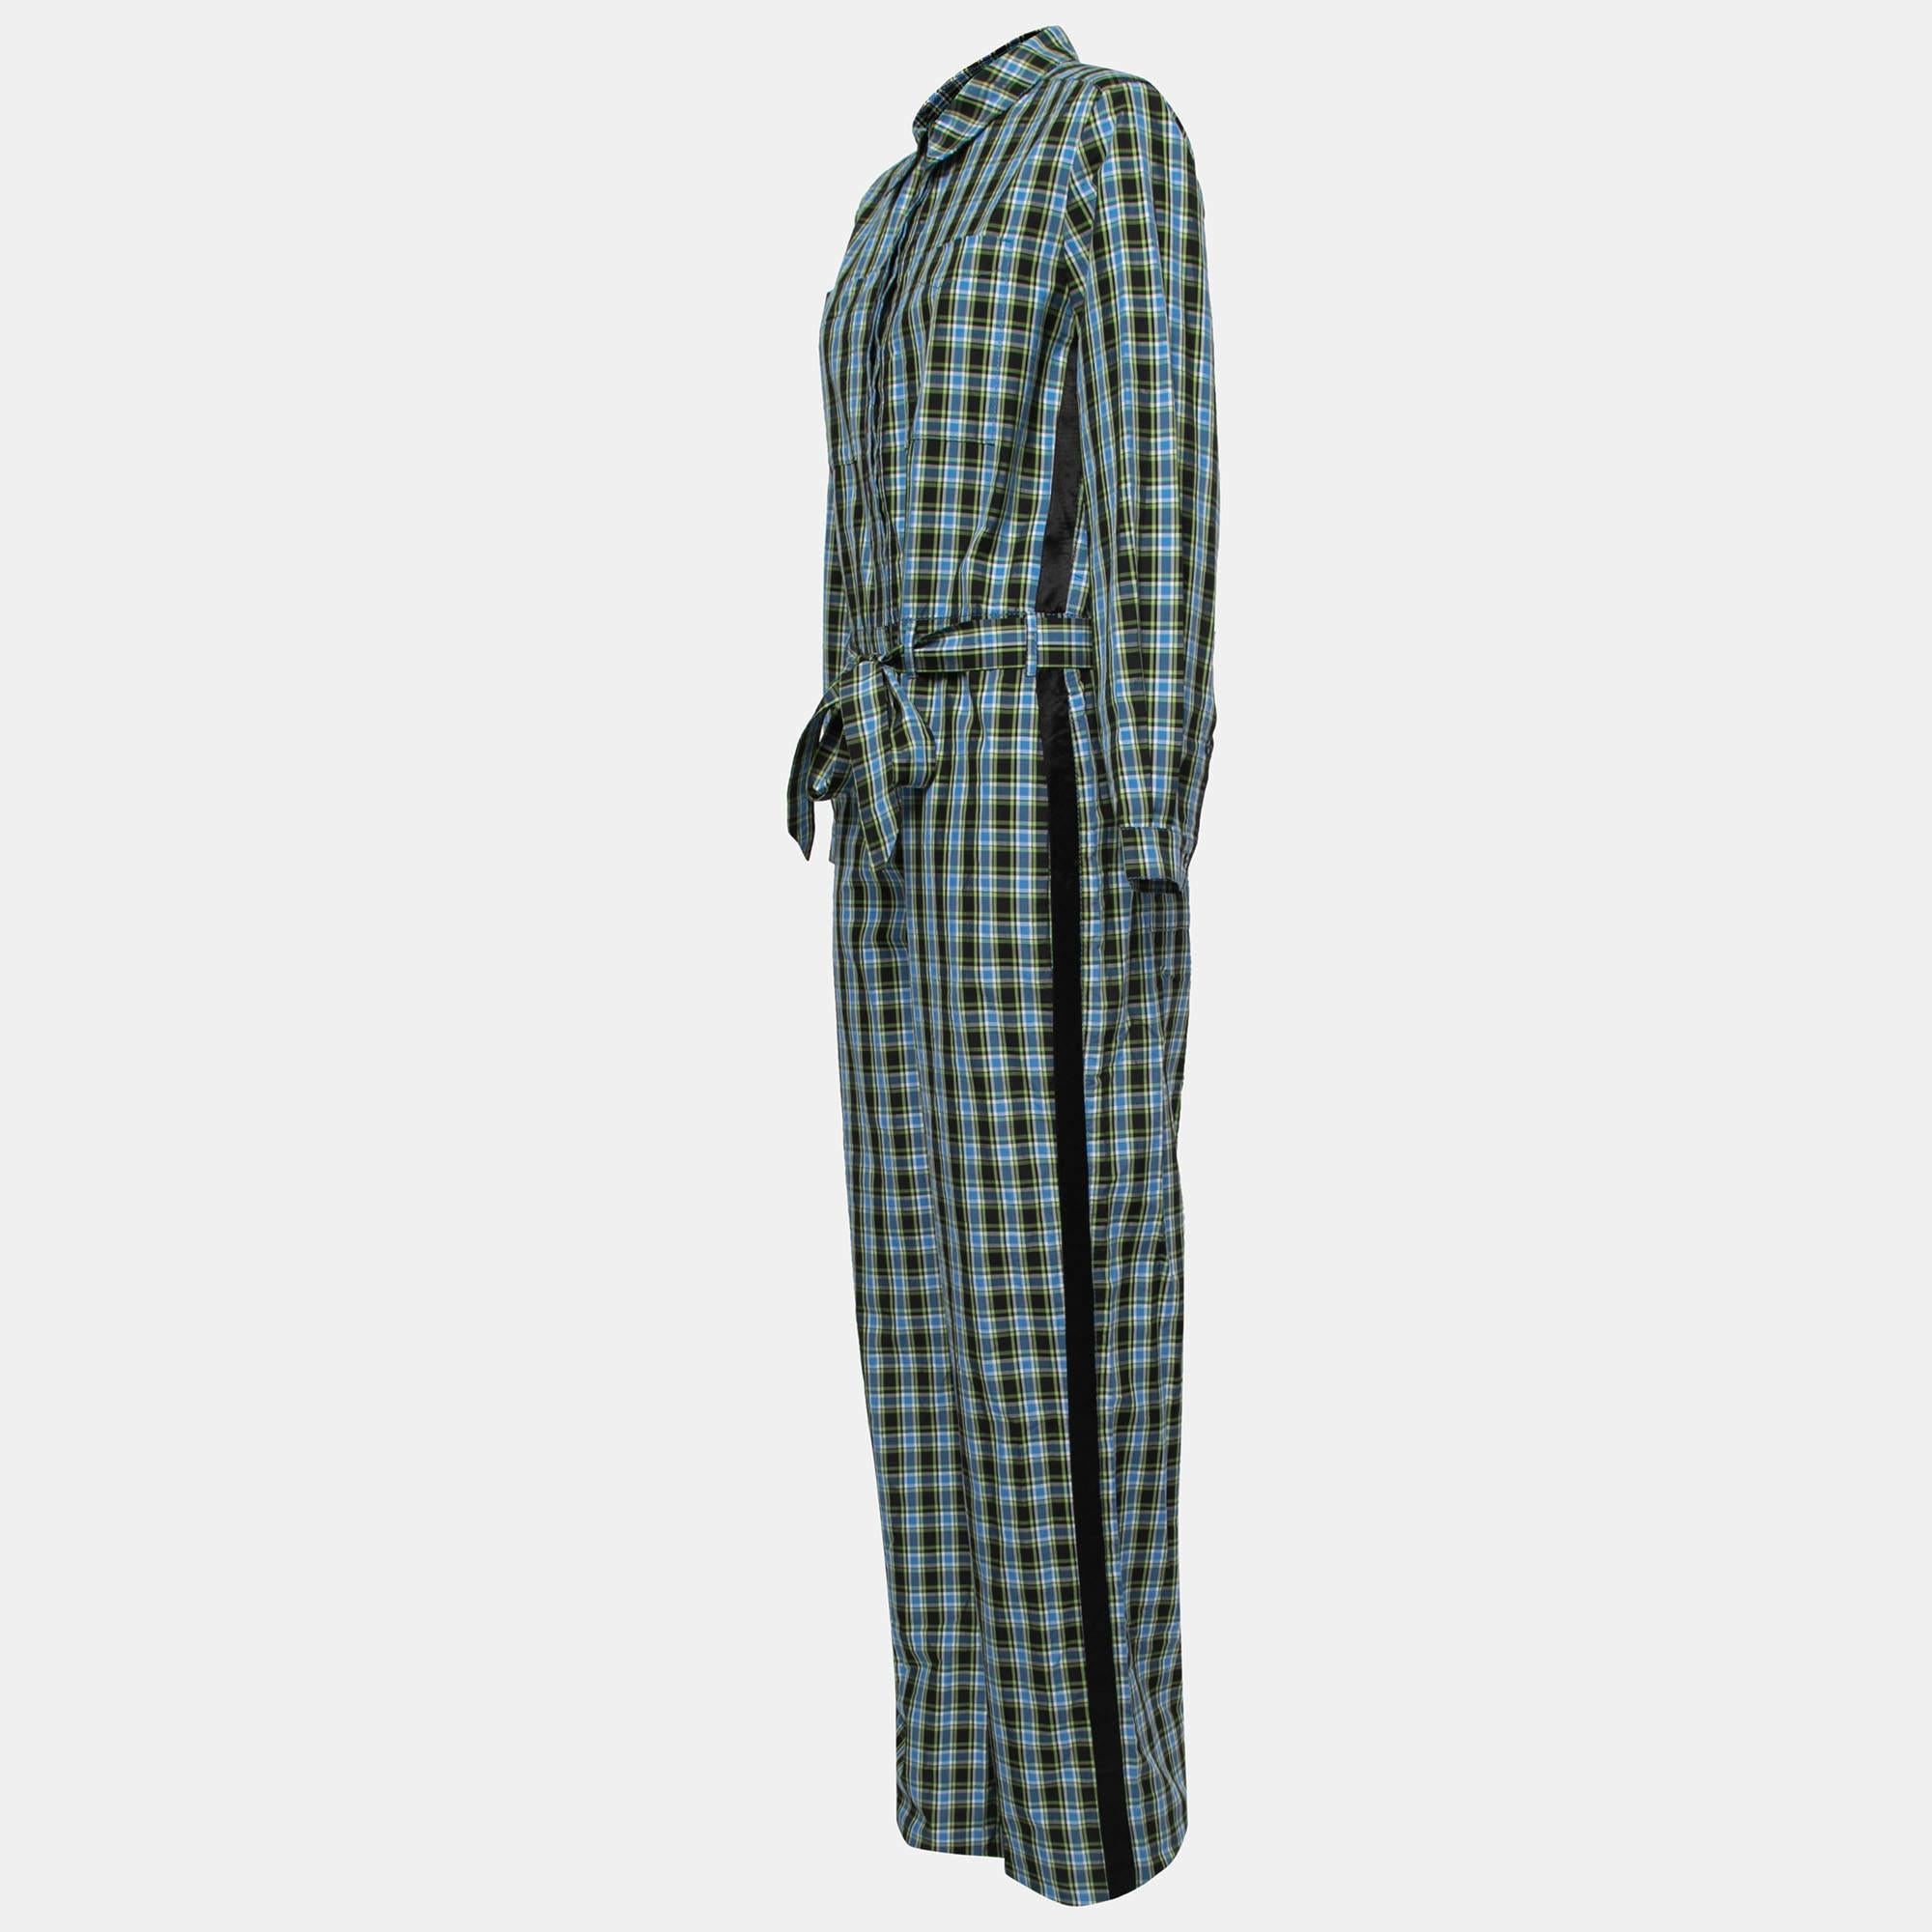 Giving off those comfy vibes is this Burberry jumpsuit, perfect for relaxed days. It is made from cotton and displays a stylish plaid checked pattern with a belt detail. Pair it with flats and hoop earrings for that chic look.

Includes: Price Tag,